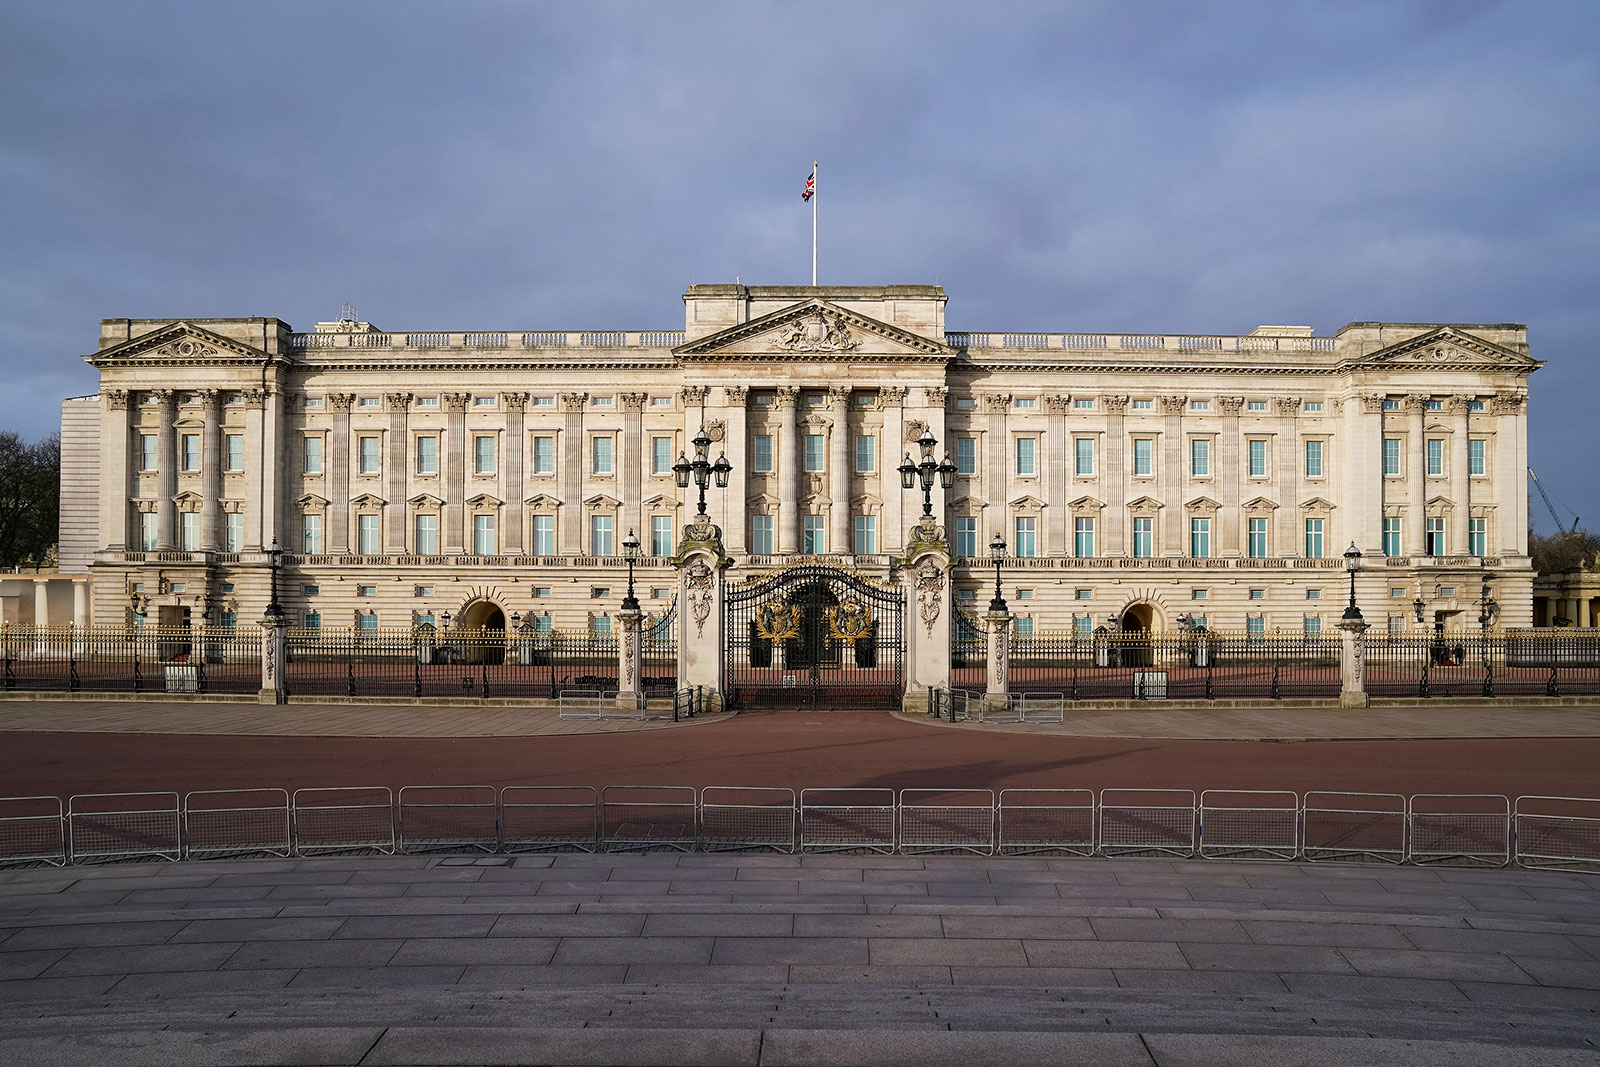 The exterior of Buckingham Palace in London.